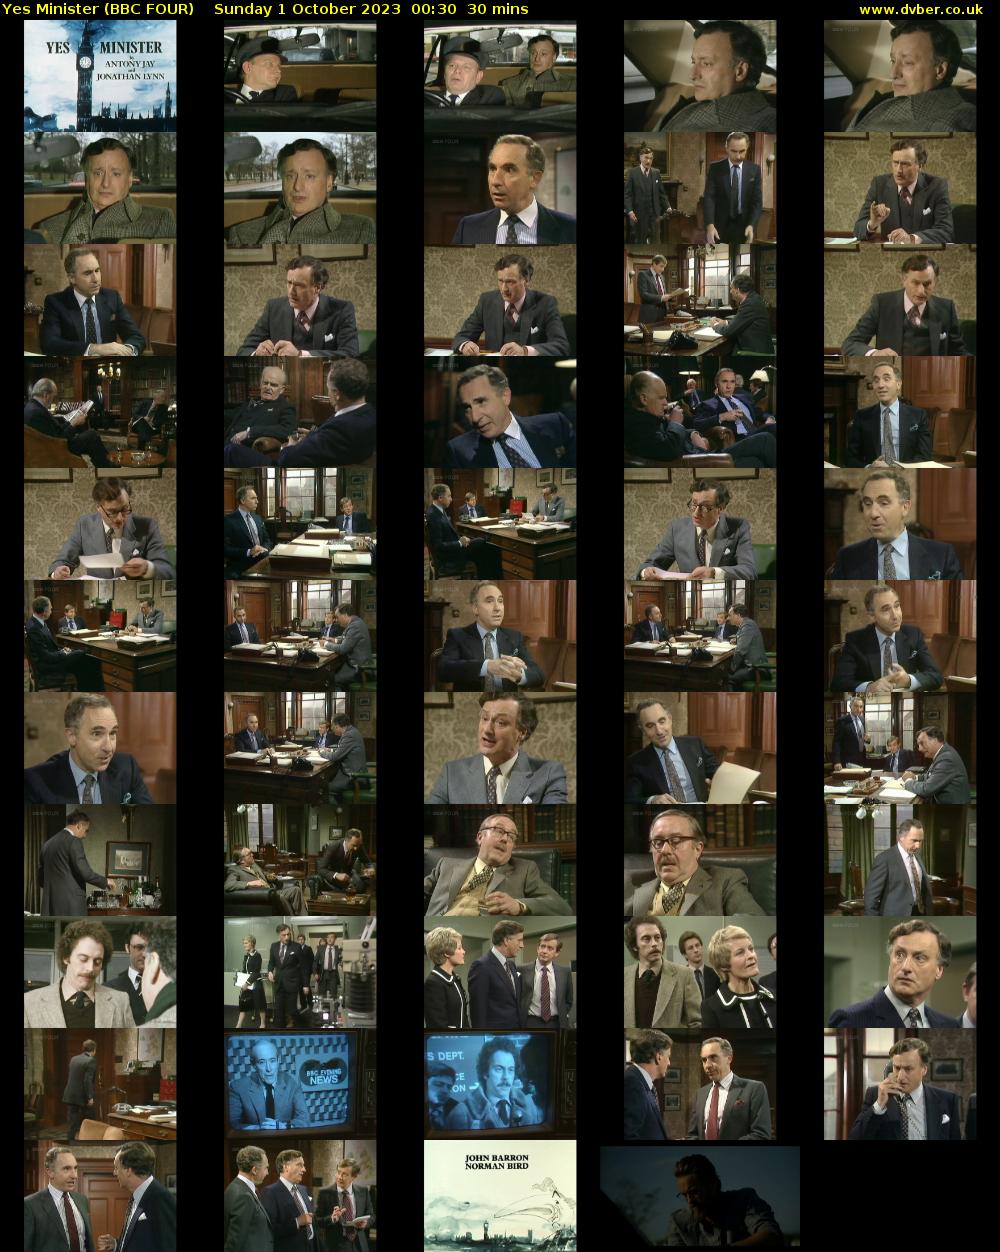 Yes Minister (BBC FOUR) Sunday 1 October 2023 00:30 - 01:00